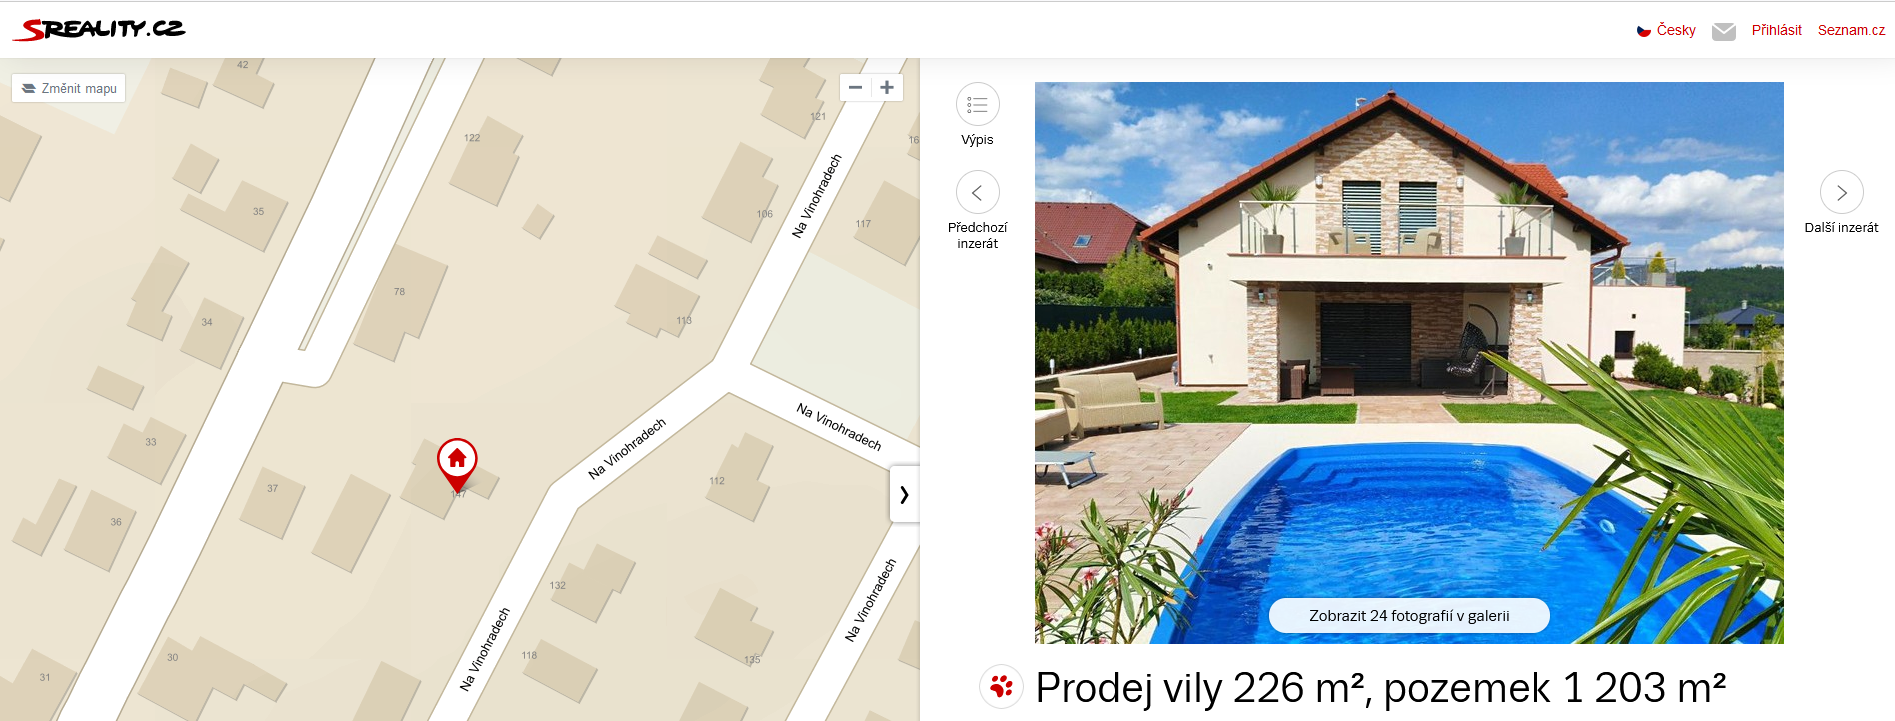 Example of an ad view with a map and a picture of the property.